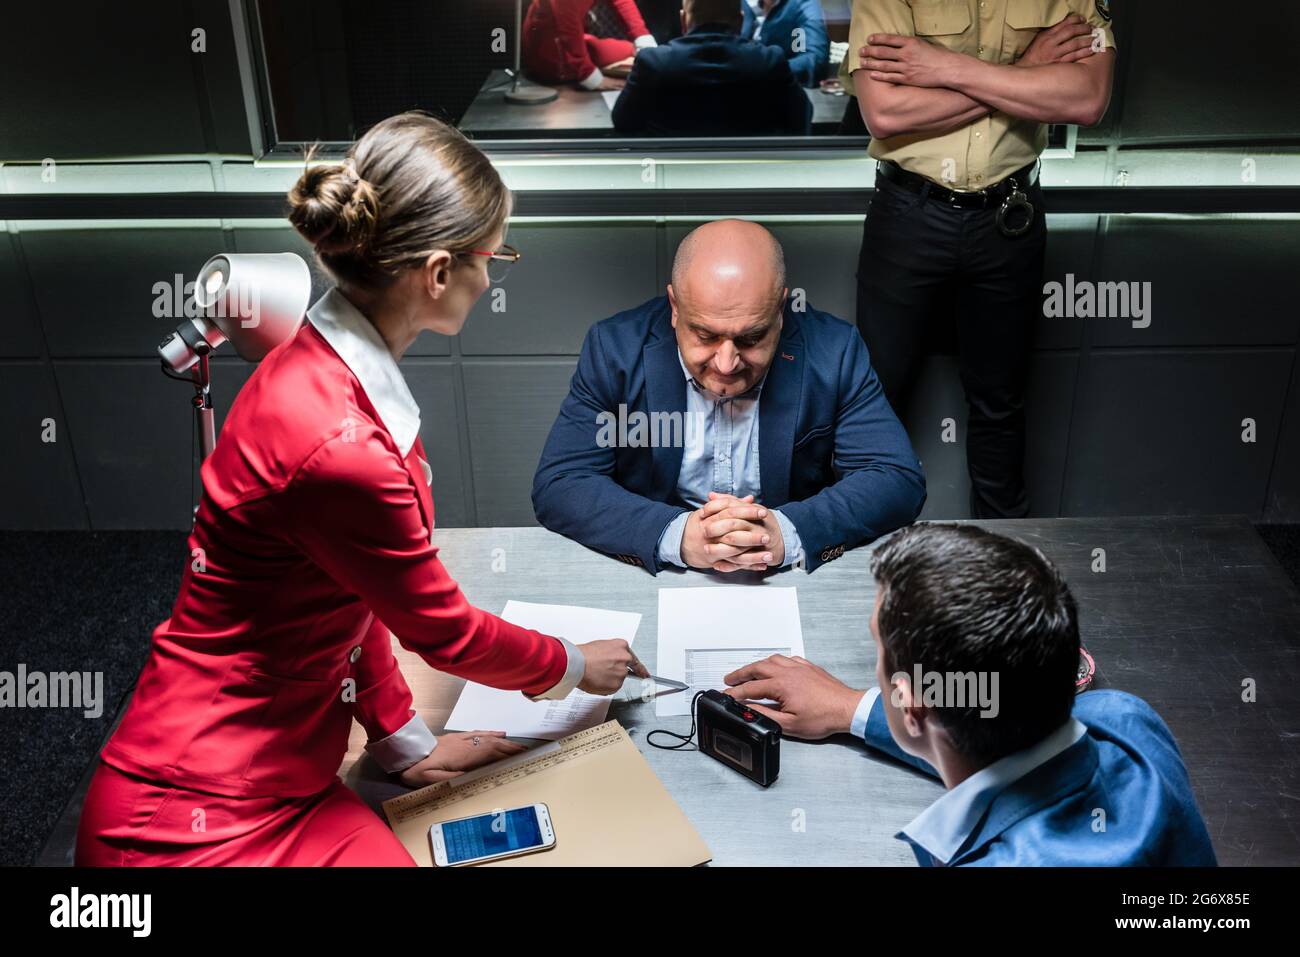 Middle-aged man thinking about his statement and the criminal charge while sitting down during interrogation in the office of the police station Stock Photo